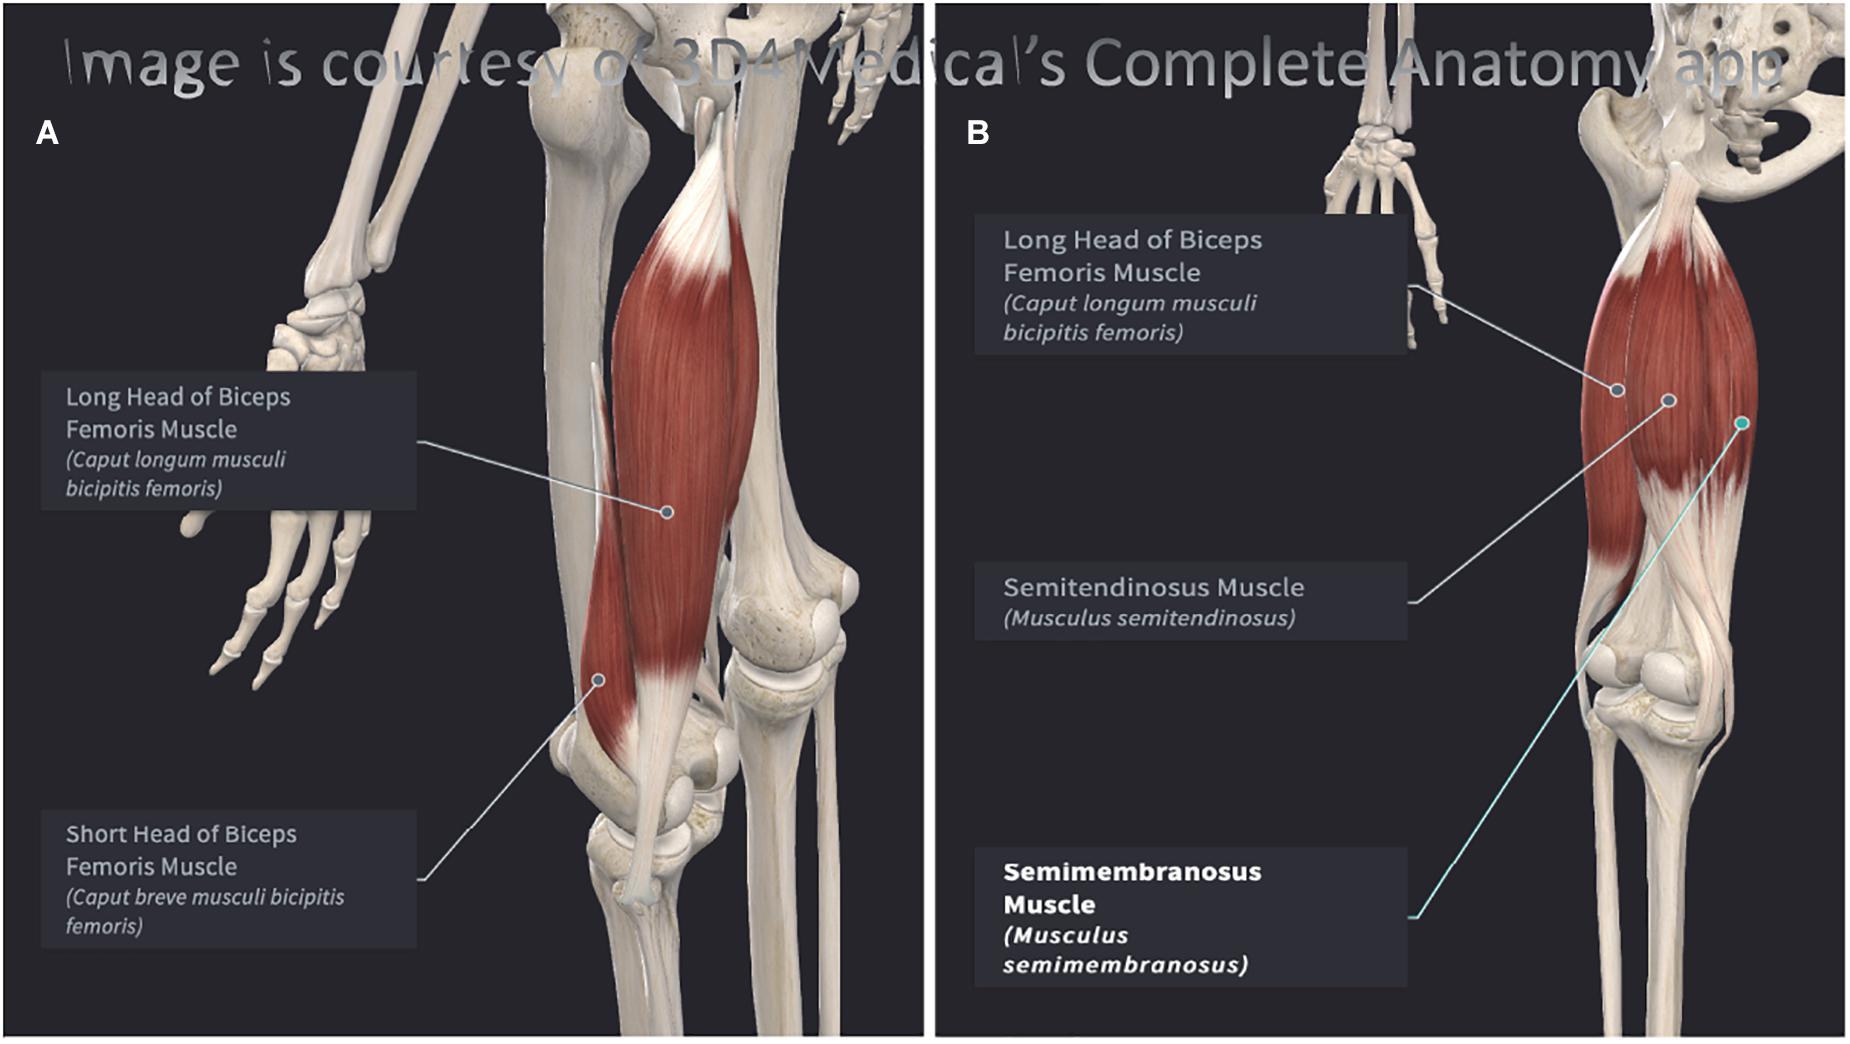 Injury Prevention and Body Mechanics - Physiopedia